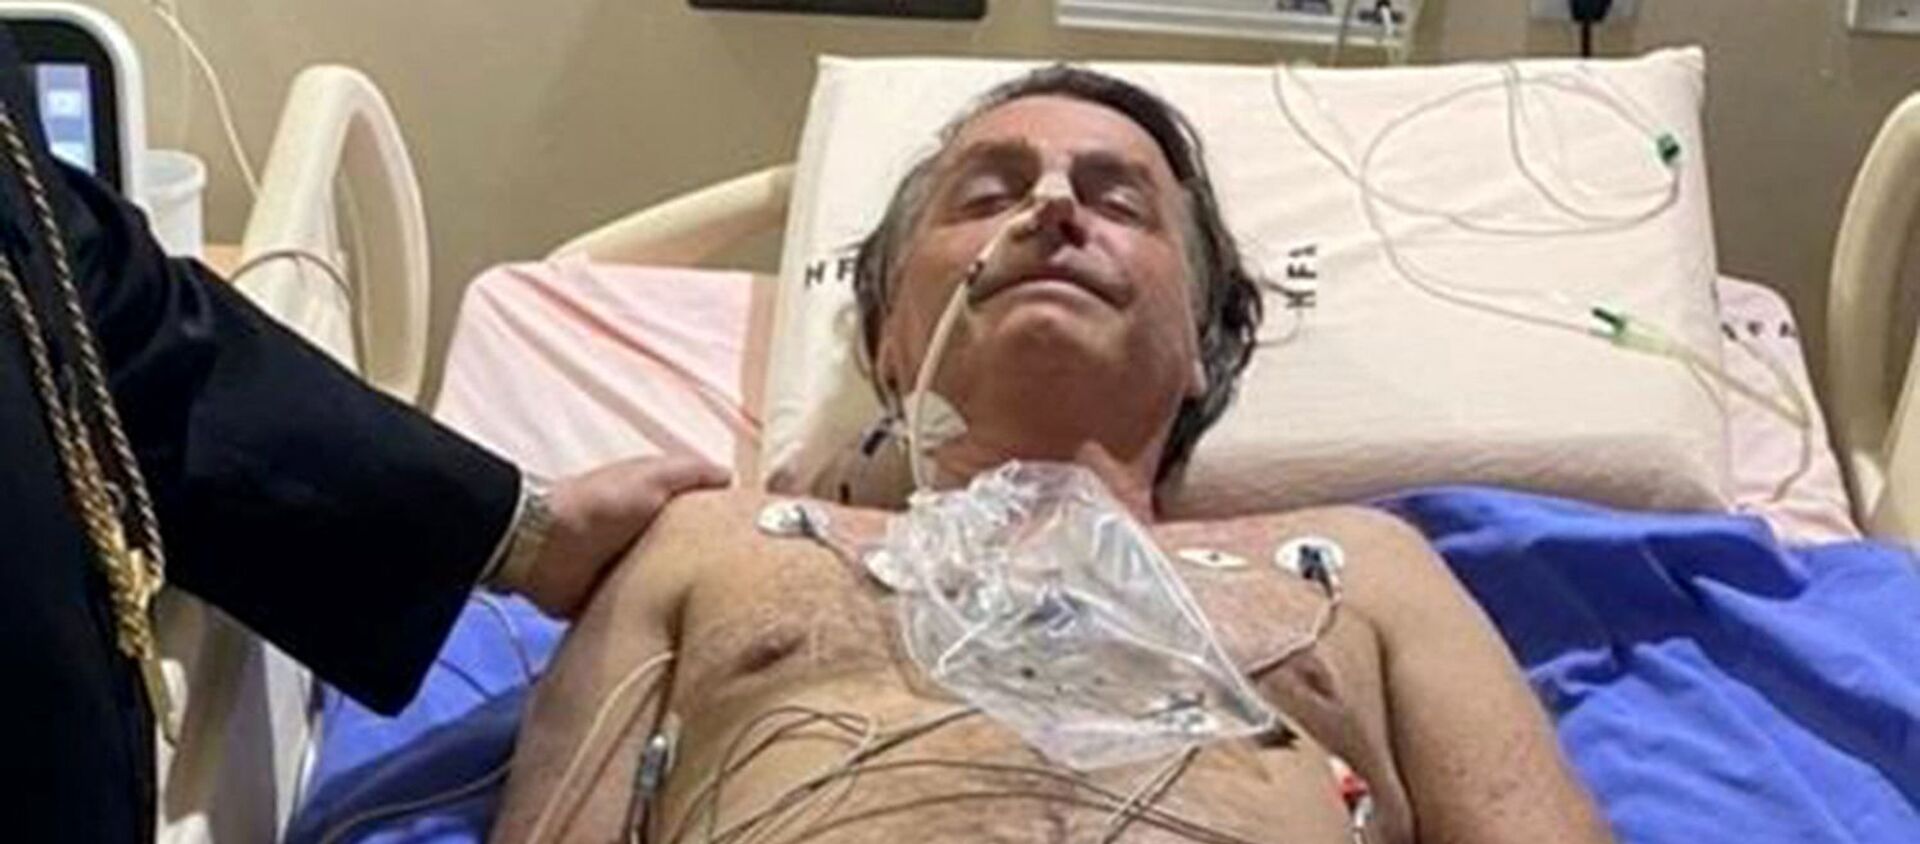 This handout photo obtained from the twitter account of Brazil's President Jair Bolsonaro (@jairbolsonaro), shows Brazil's President Jair Bolsonaro on his hospital bed in Brasilia on July 14, 2021. - Brazil President Jair Bolsonaro was admitted to hospital on Wednesday to investigate the cause of persistent hiccups, the government said. - Sputnik International, 1920, 14.07.2021